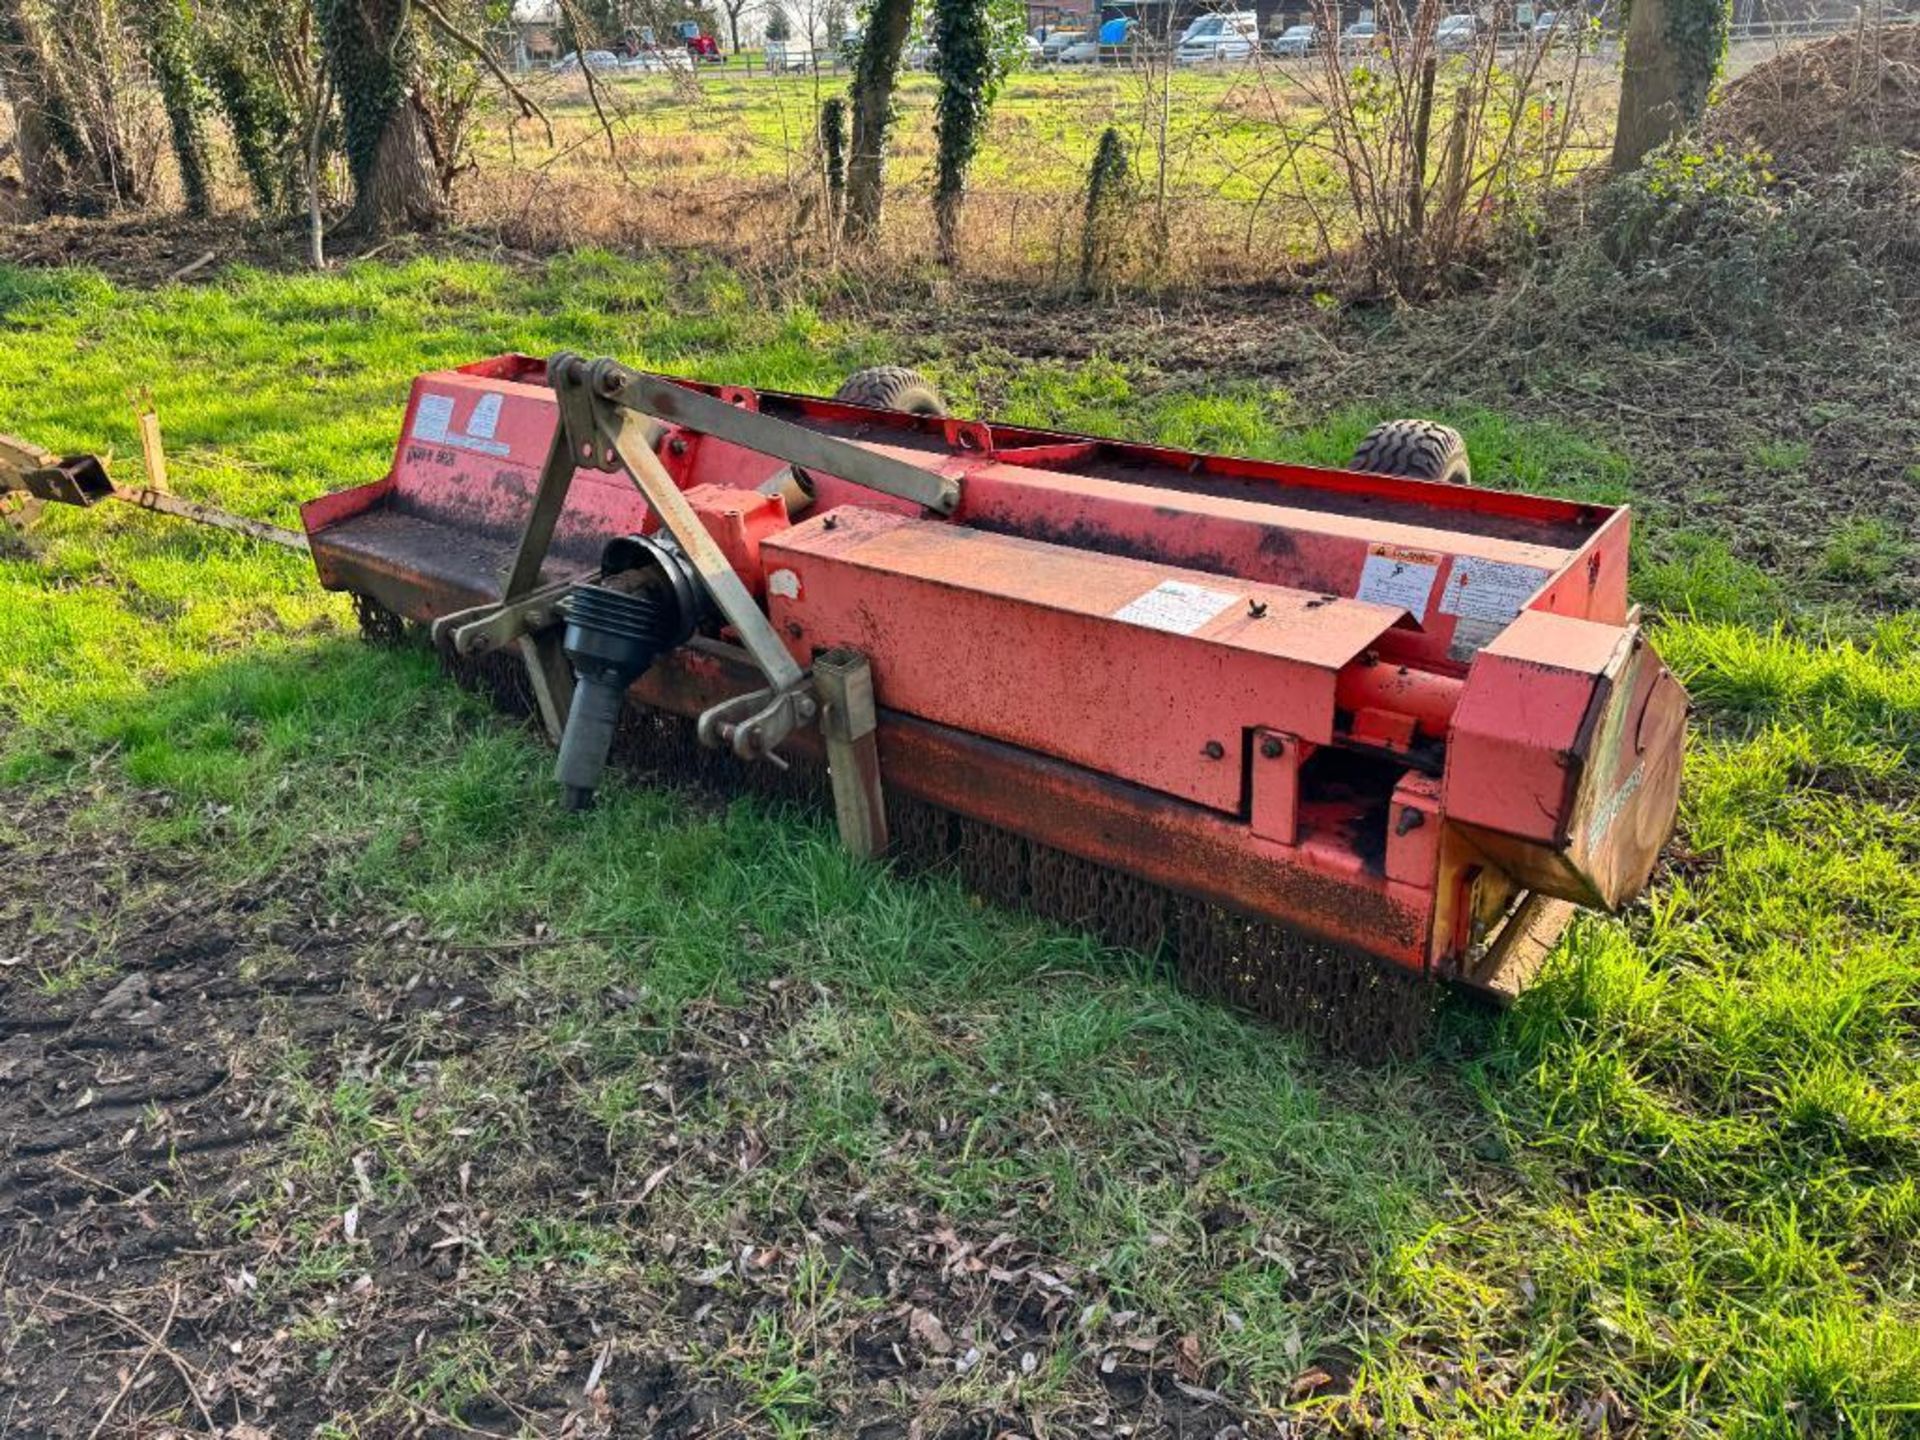 1993 Muratori MT7P 320 3.2m flail mower with spares blades. Serial No: 48503 - Image 6 of 10